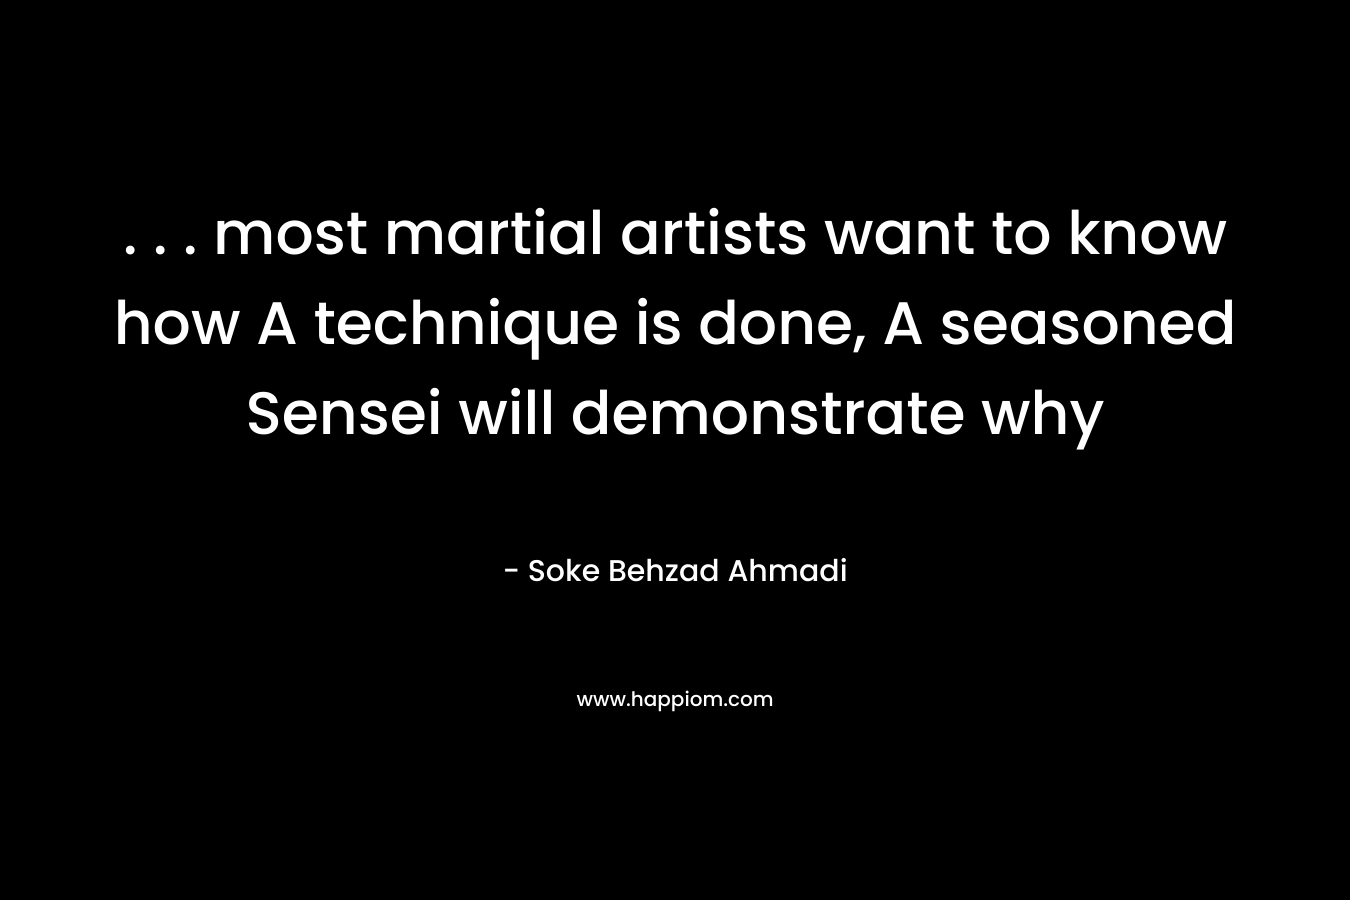 . . . most martial artists want to know how A technique is done, A seasoned Sensei will demonstrate why – Soke Behzad Ahmadi